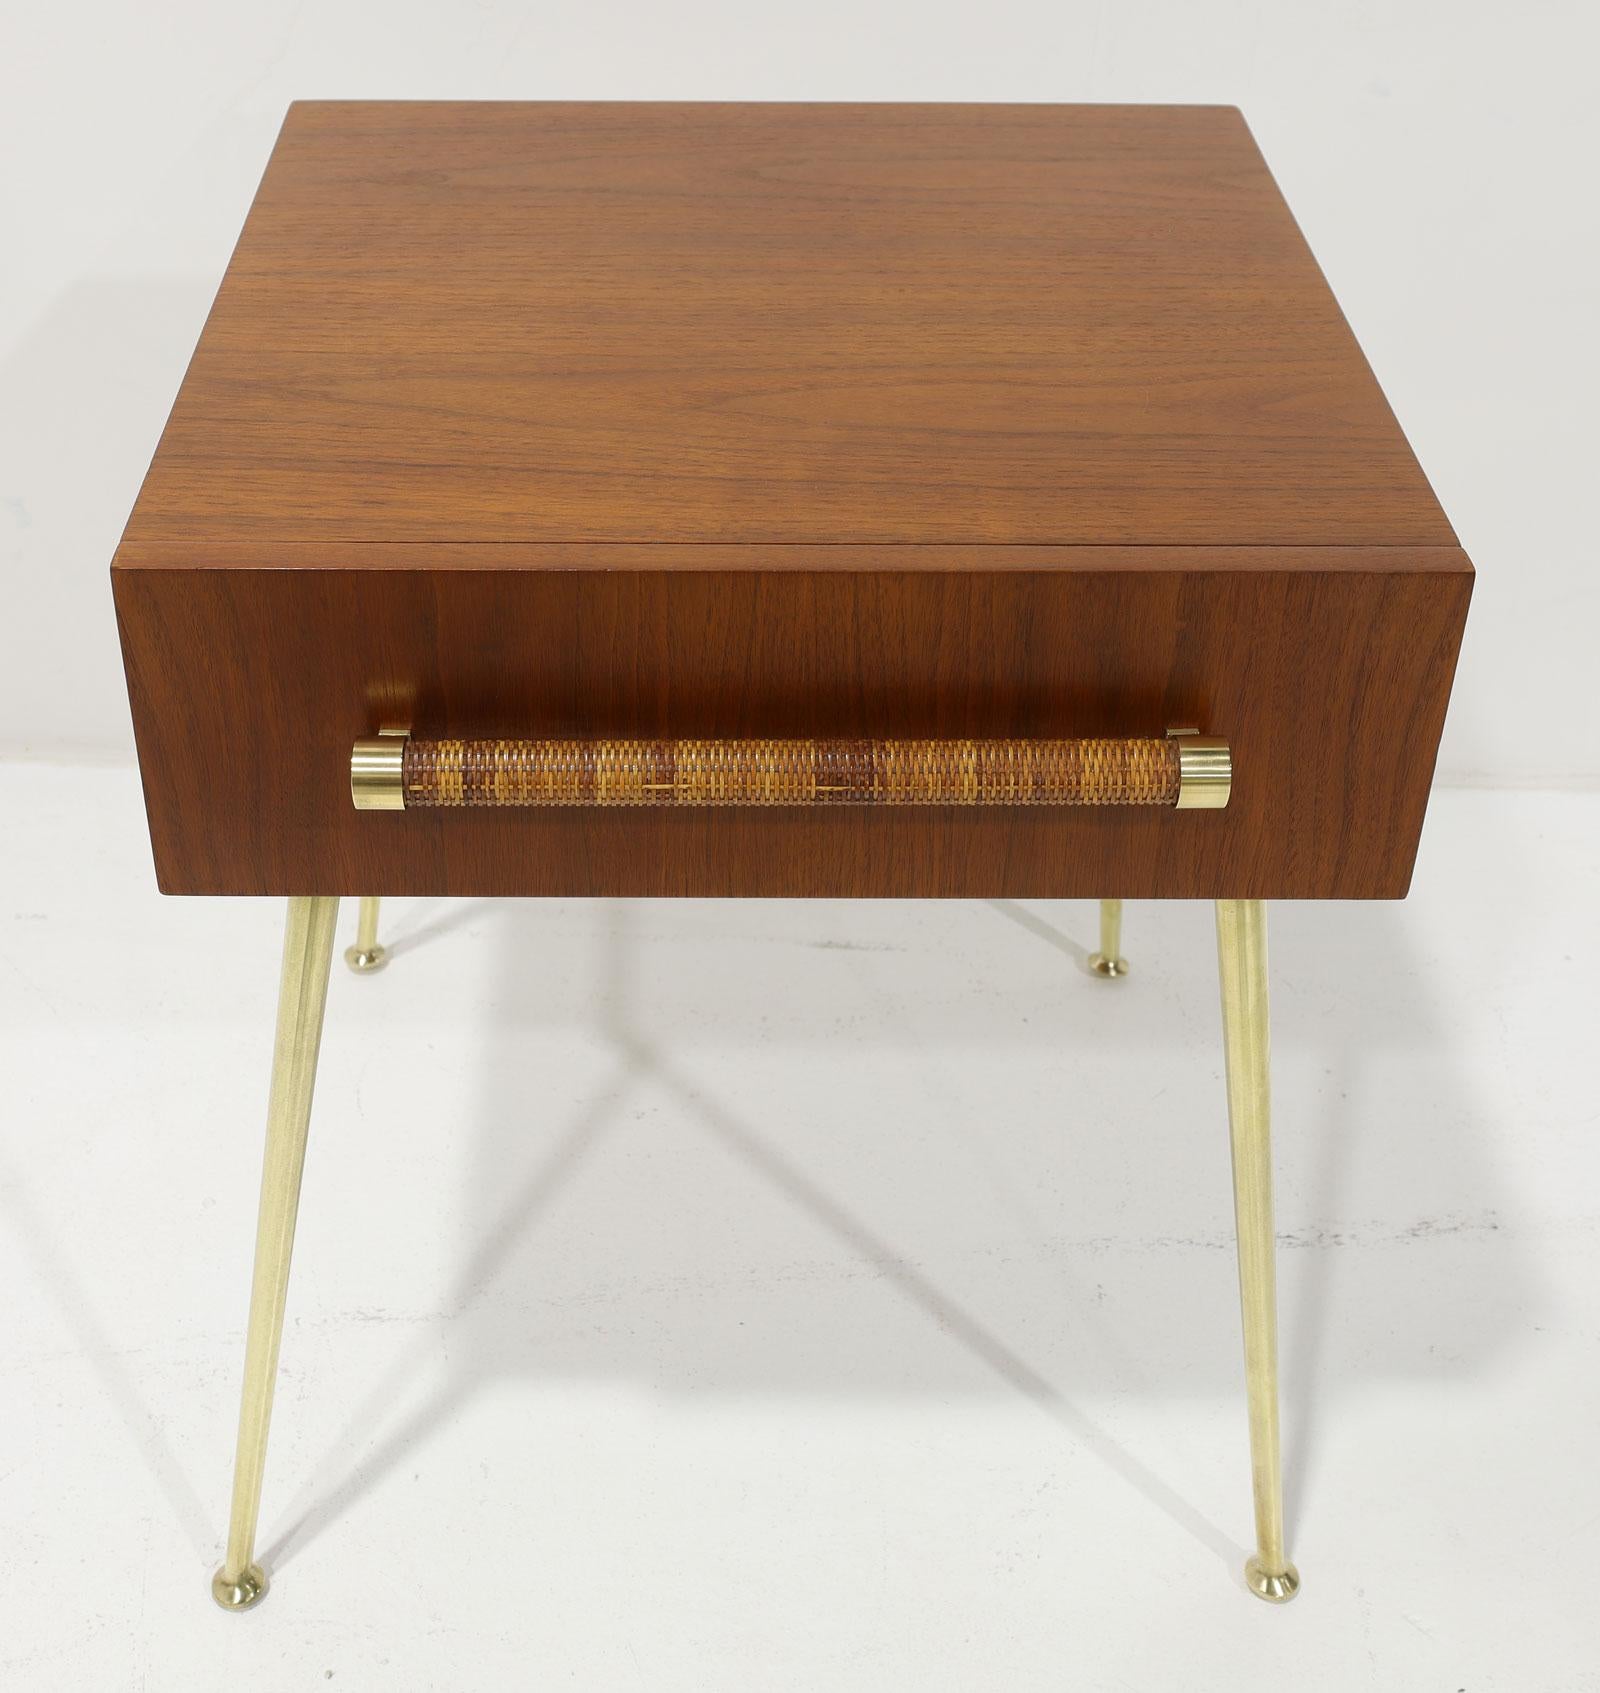 Robsjohn-Gibbings for Widdicomb Side Table in Walnut, Brass and Cane, 1950s In Good Condition For Sale In Dallas, TX